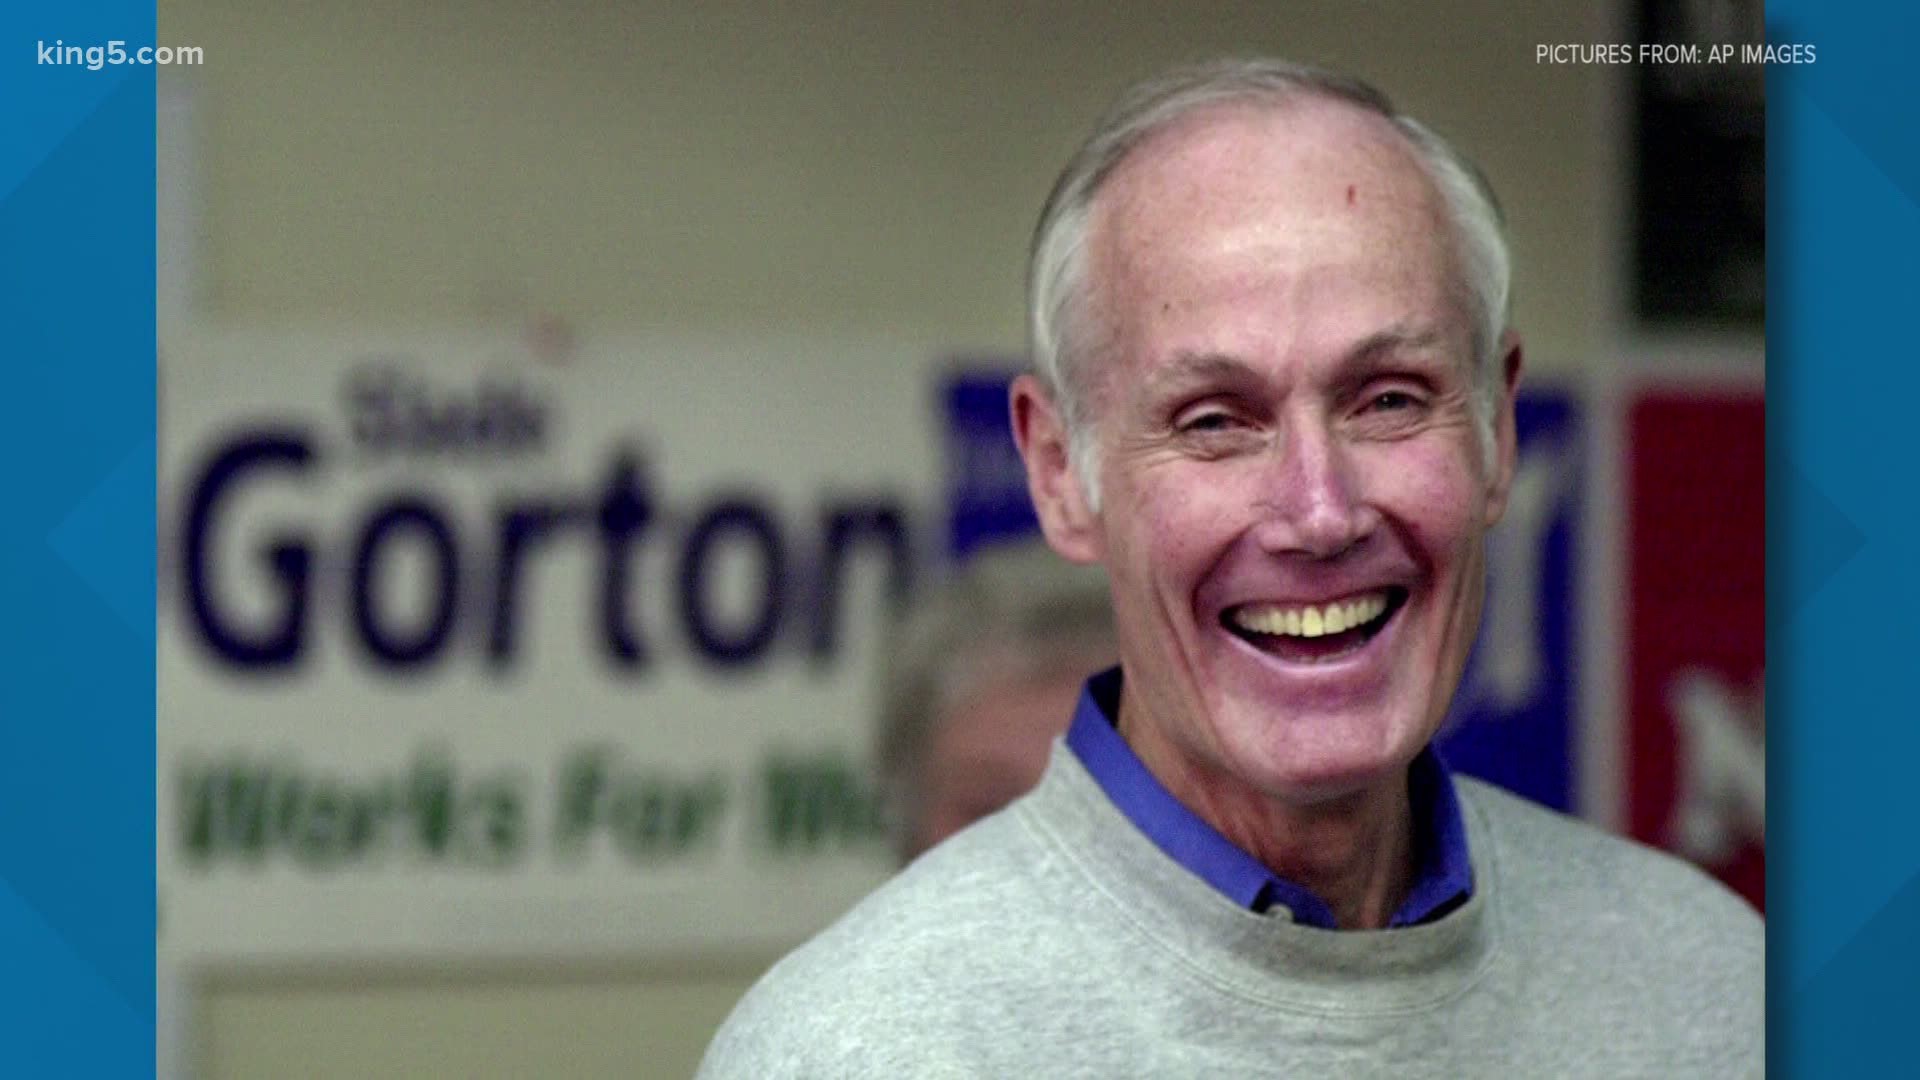 Slade Gorton, former Republican U.S. senator from Washington state, died at the age of 92 in his home Wednesday.